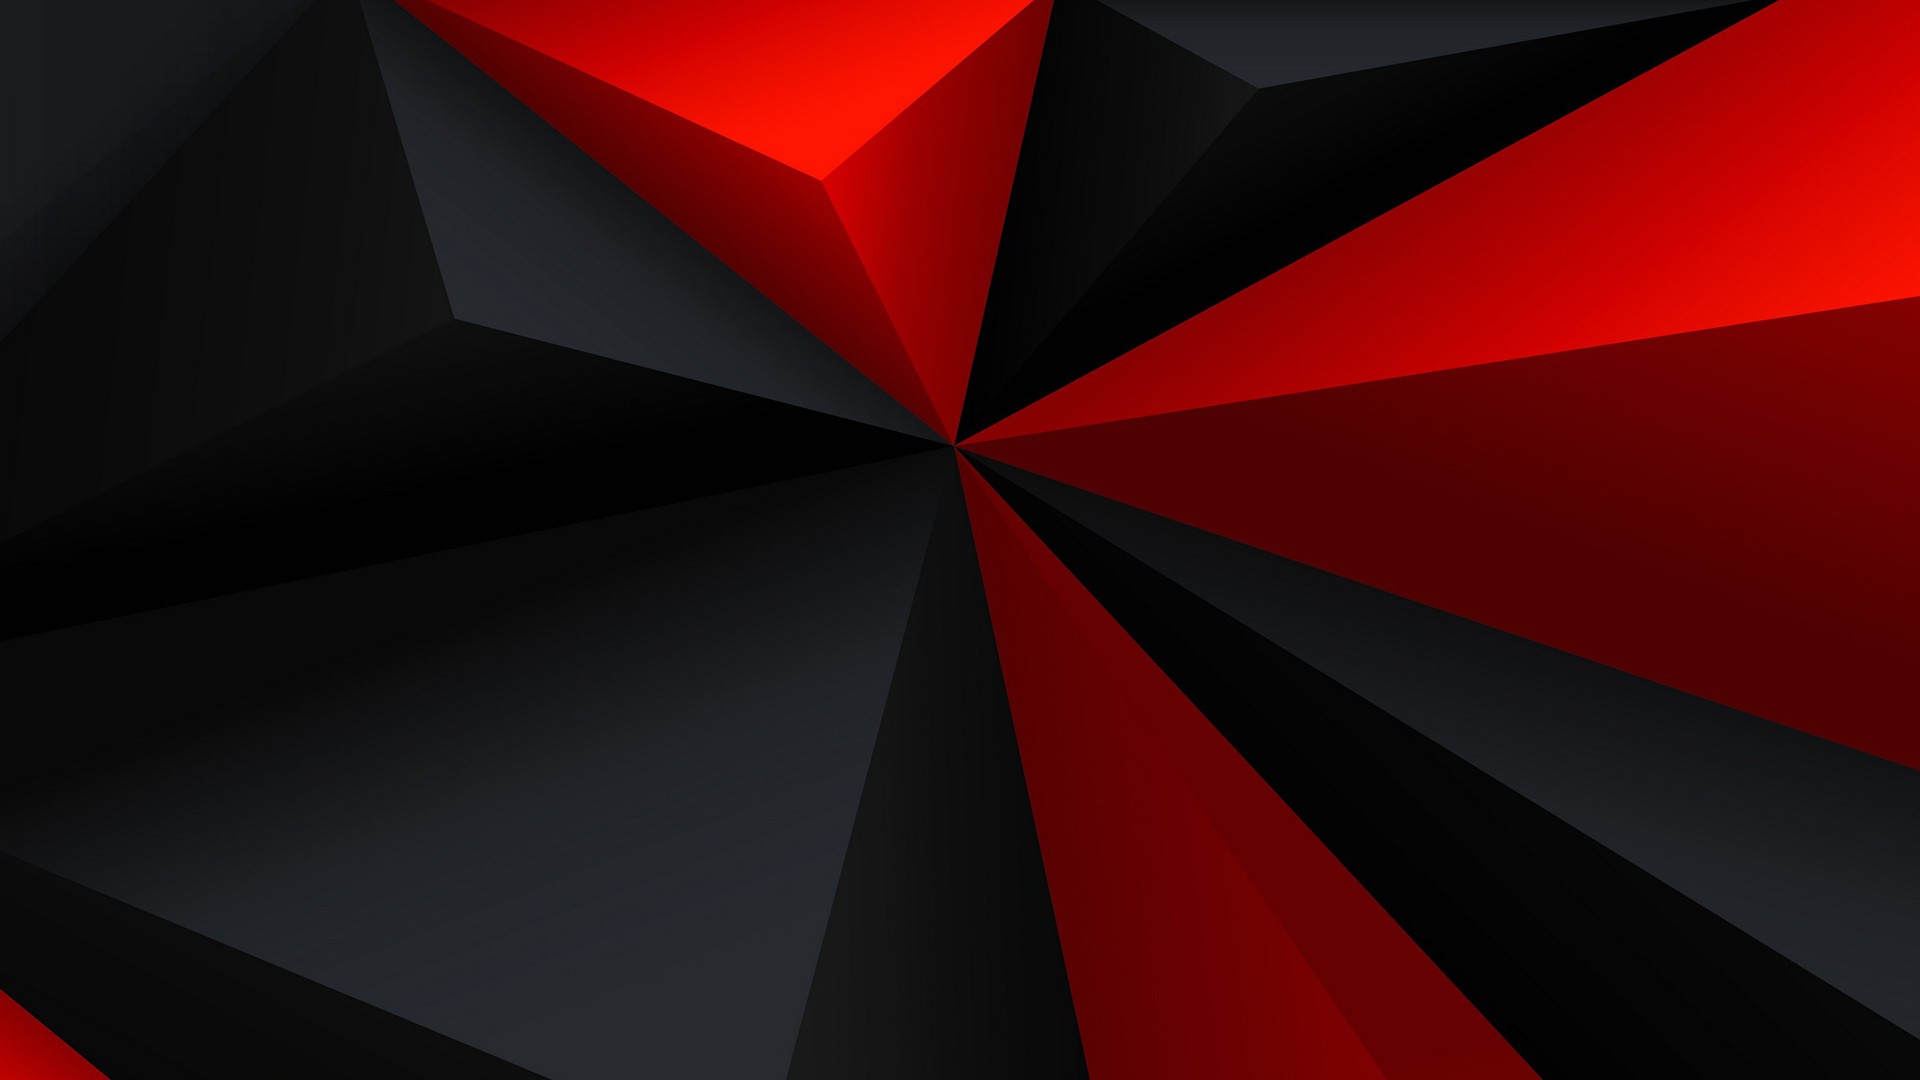 digital Art, Minimalism, Low Poly, Geometry, Triangle, Red, Black, Gray, Abstract Wallpapers HD ...